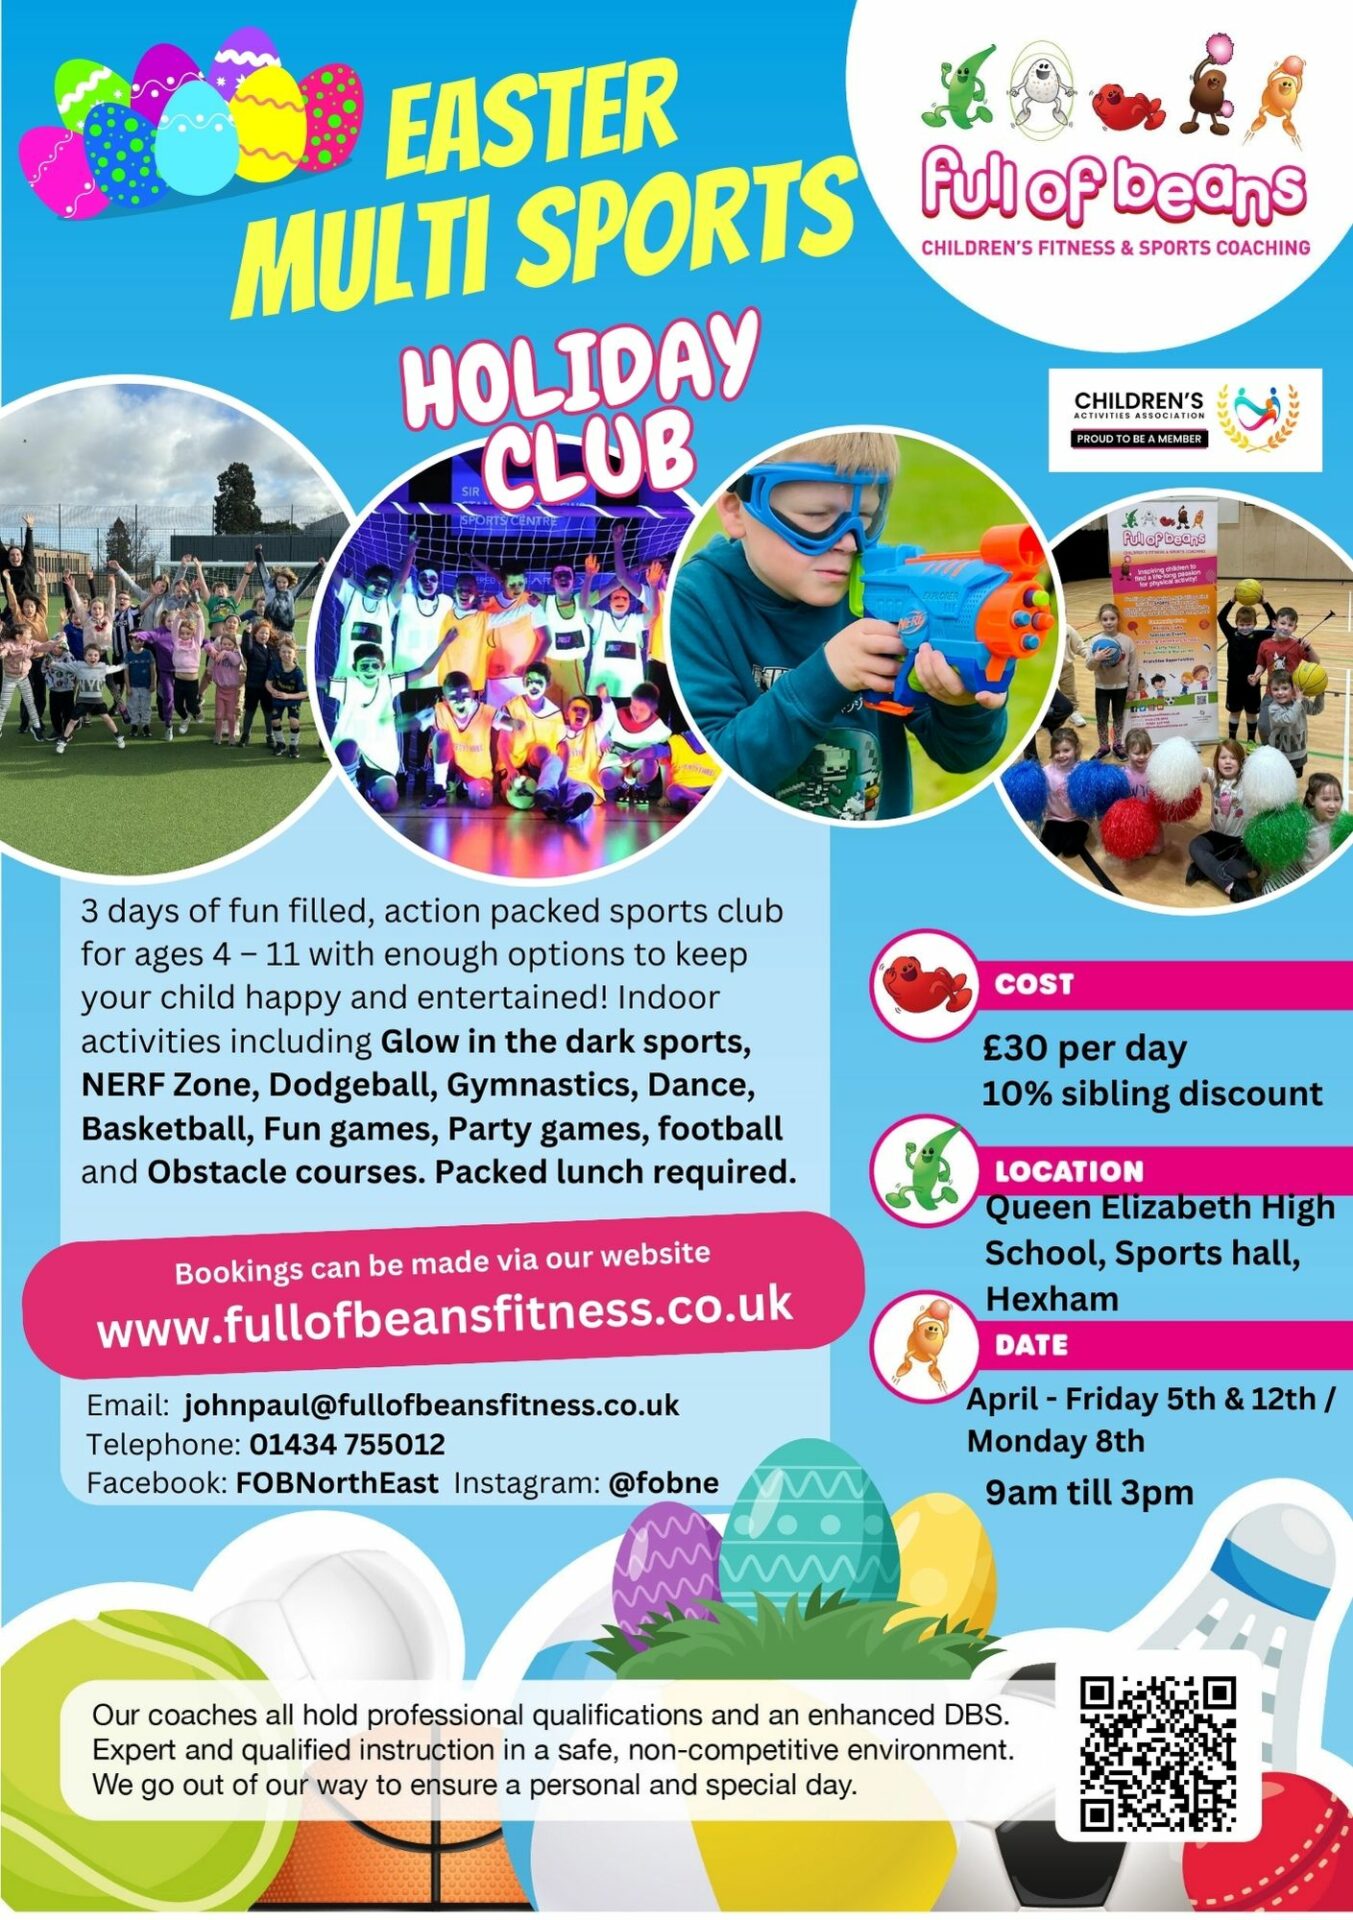 Full of Beans Easter Multi Sports Holiday Club